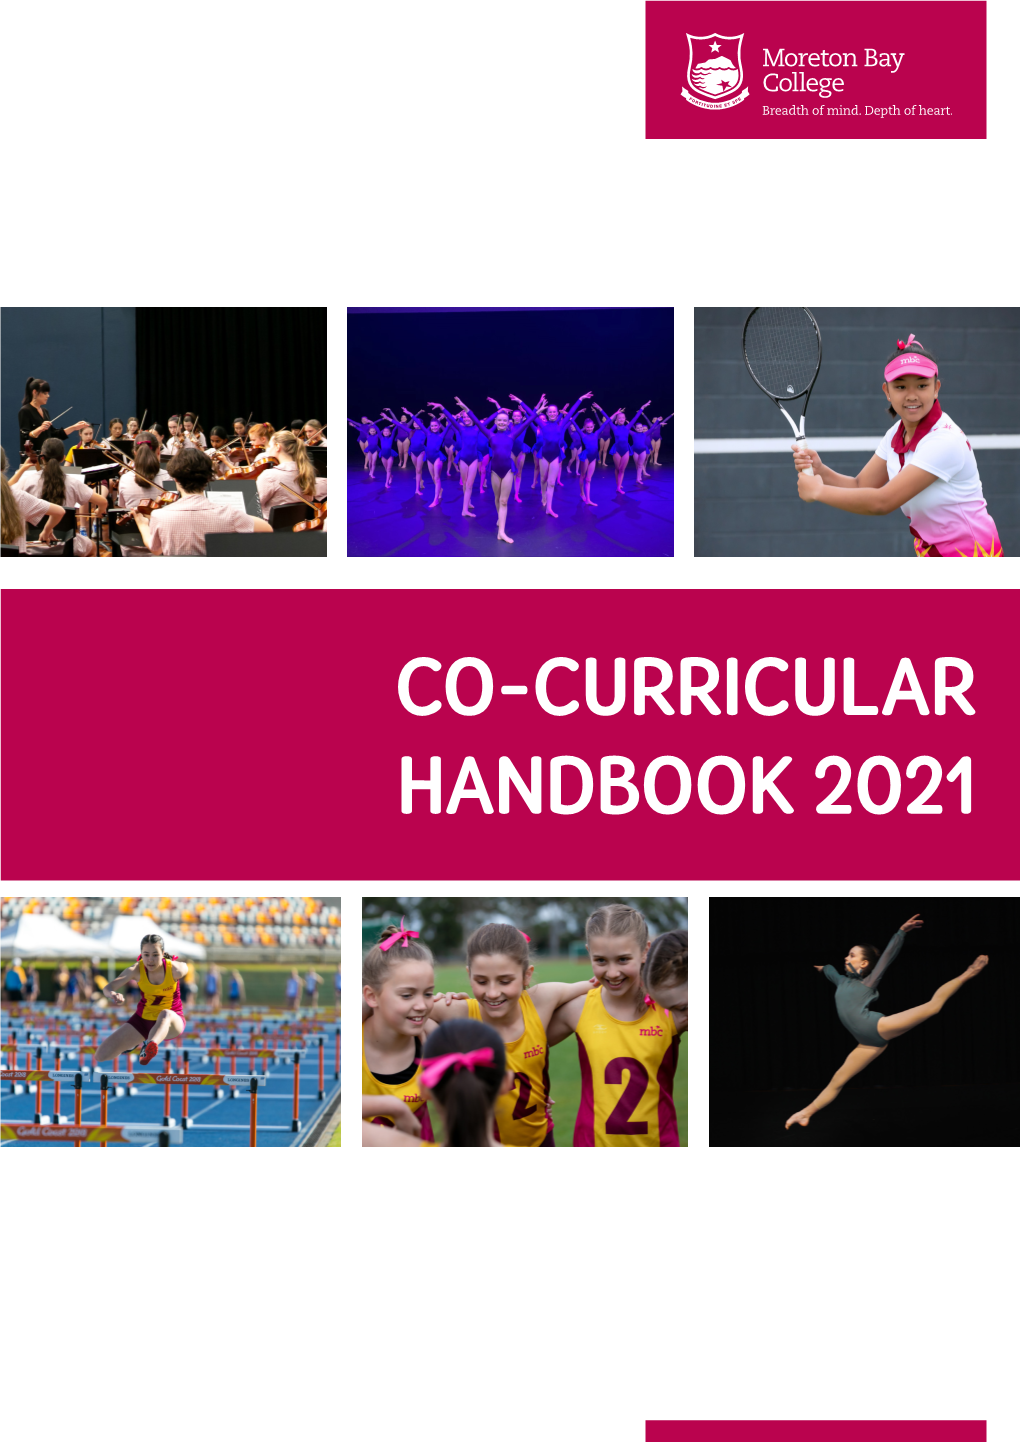 Co-Curricular Handbook 2021 Table of Contents